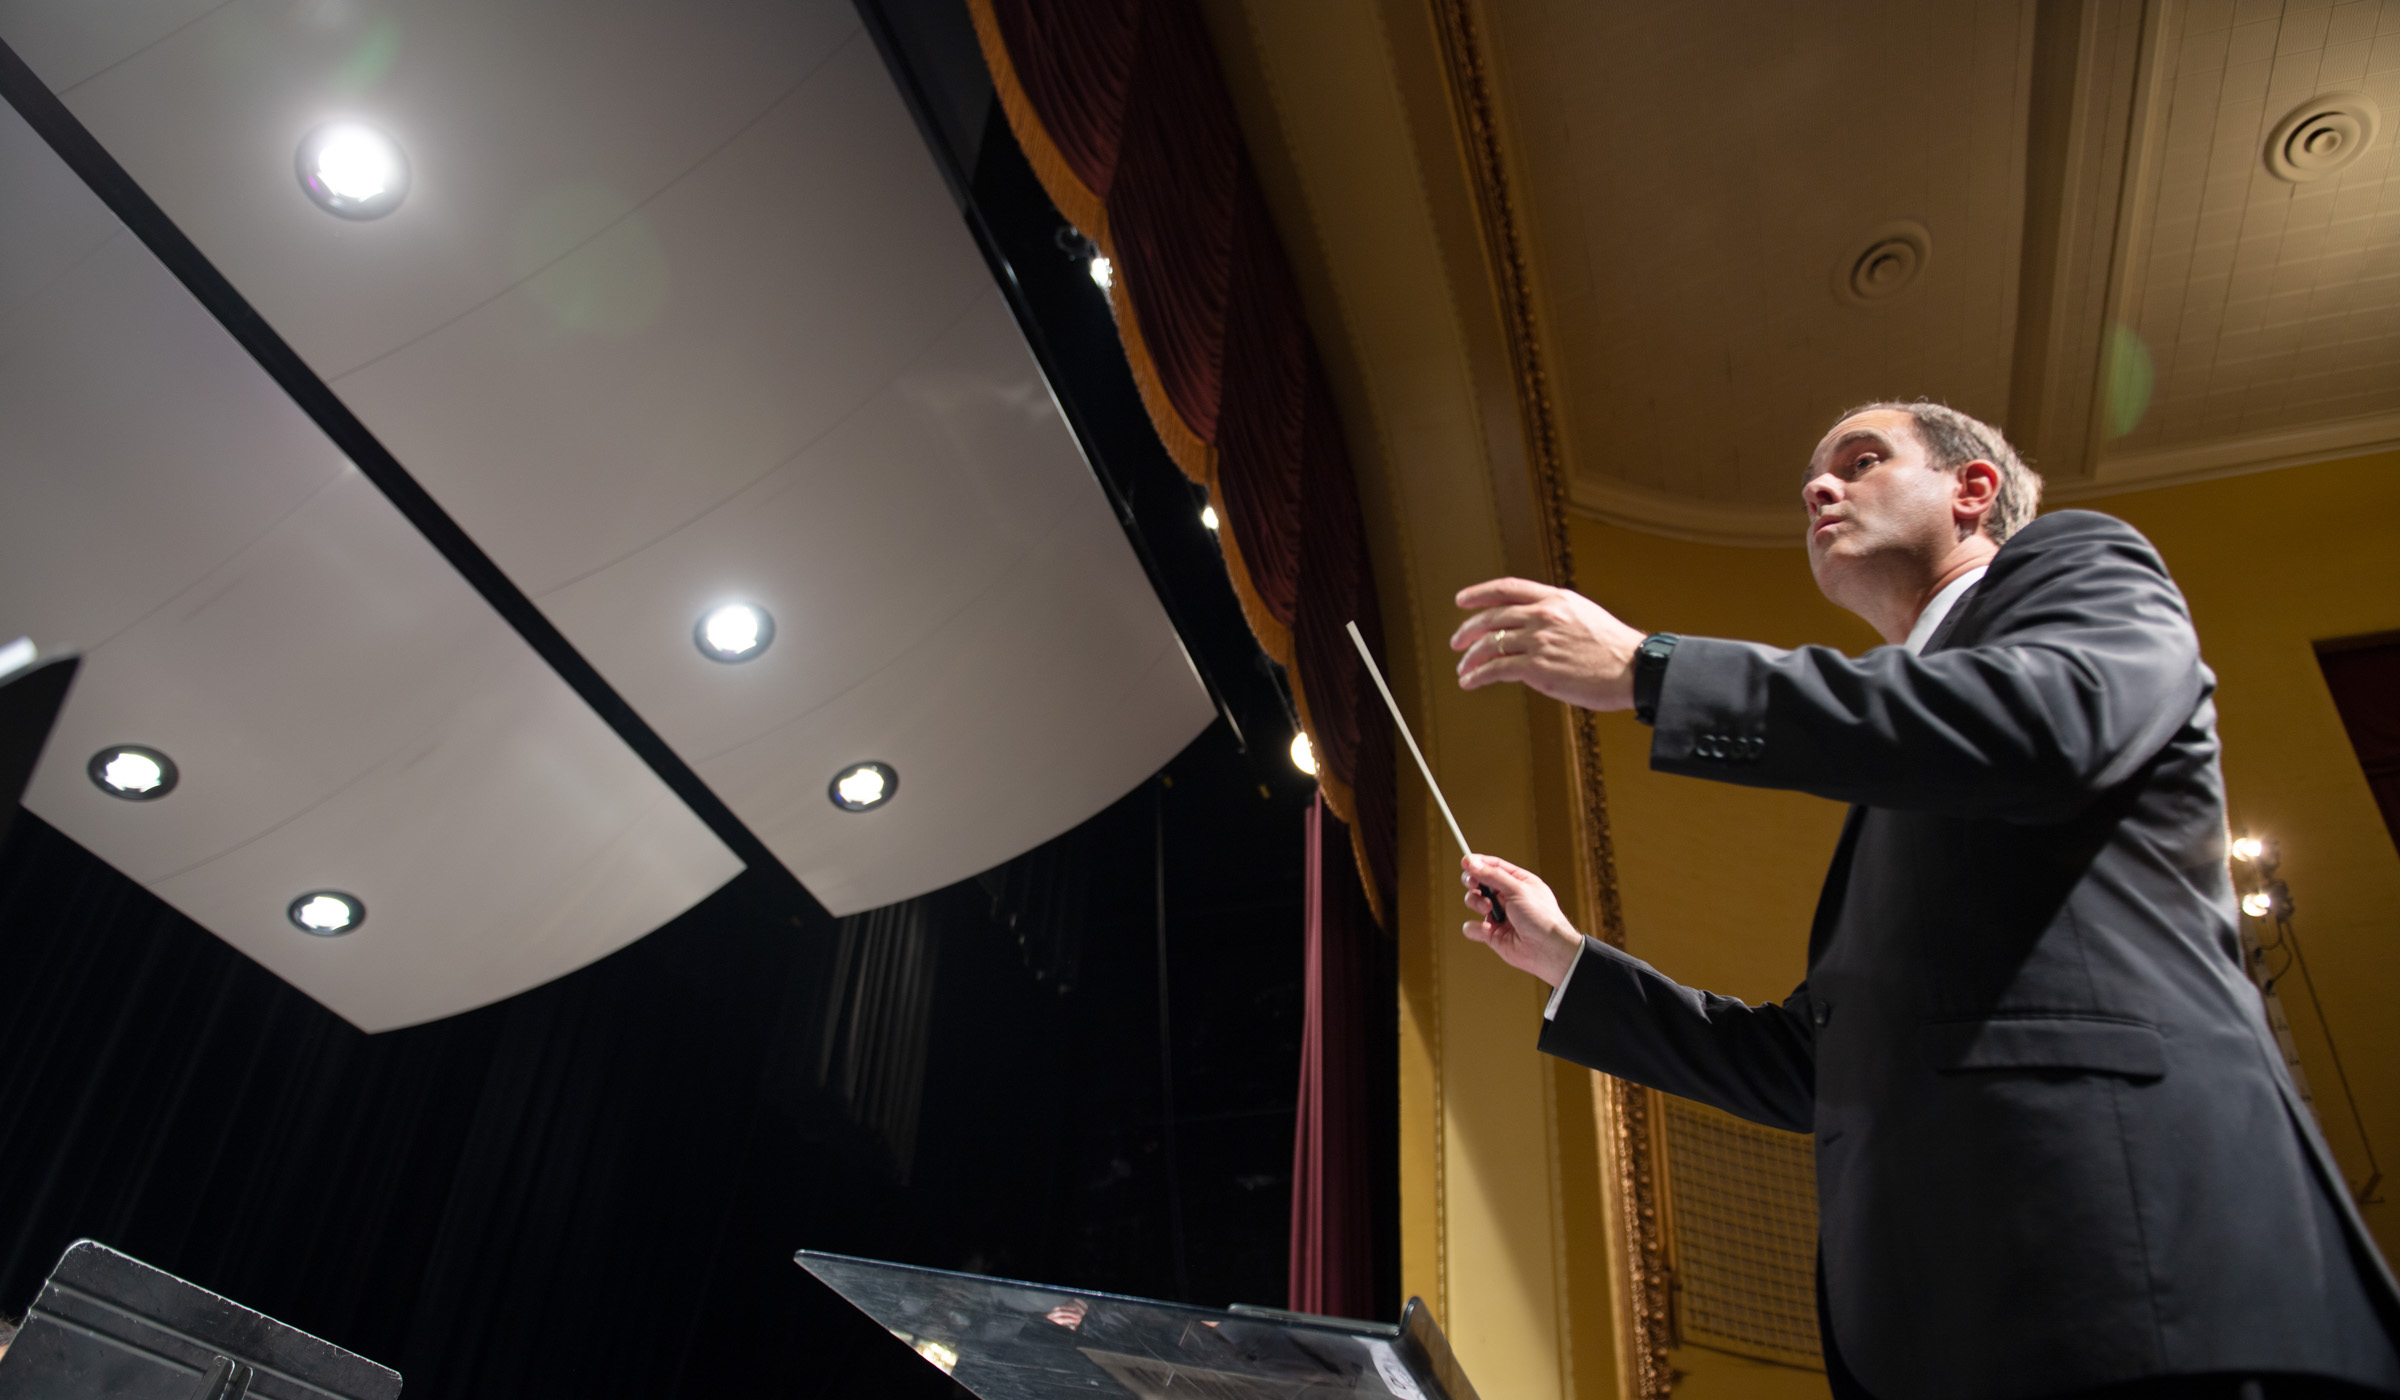 Associate Band Director, Craig Aarhus conducts the Wind Ensemble in Bettersworth Hall.